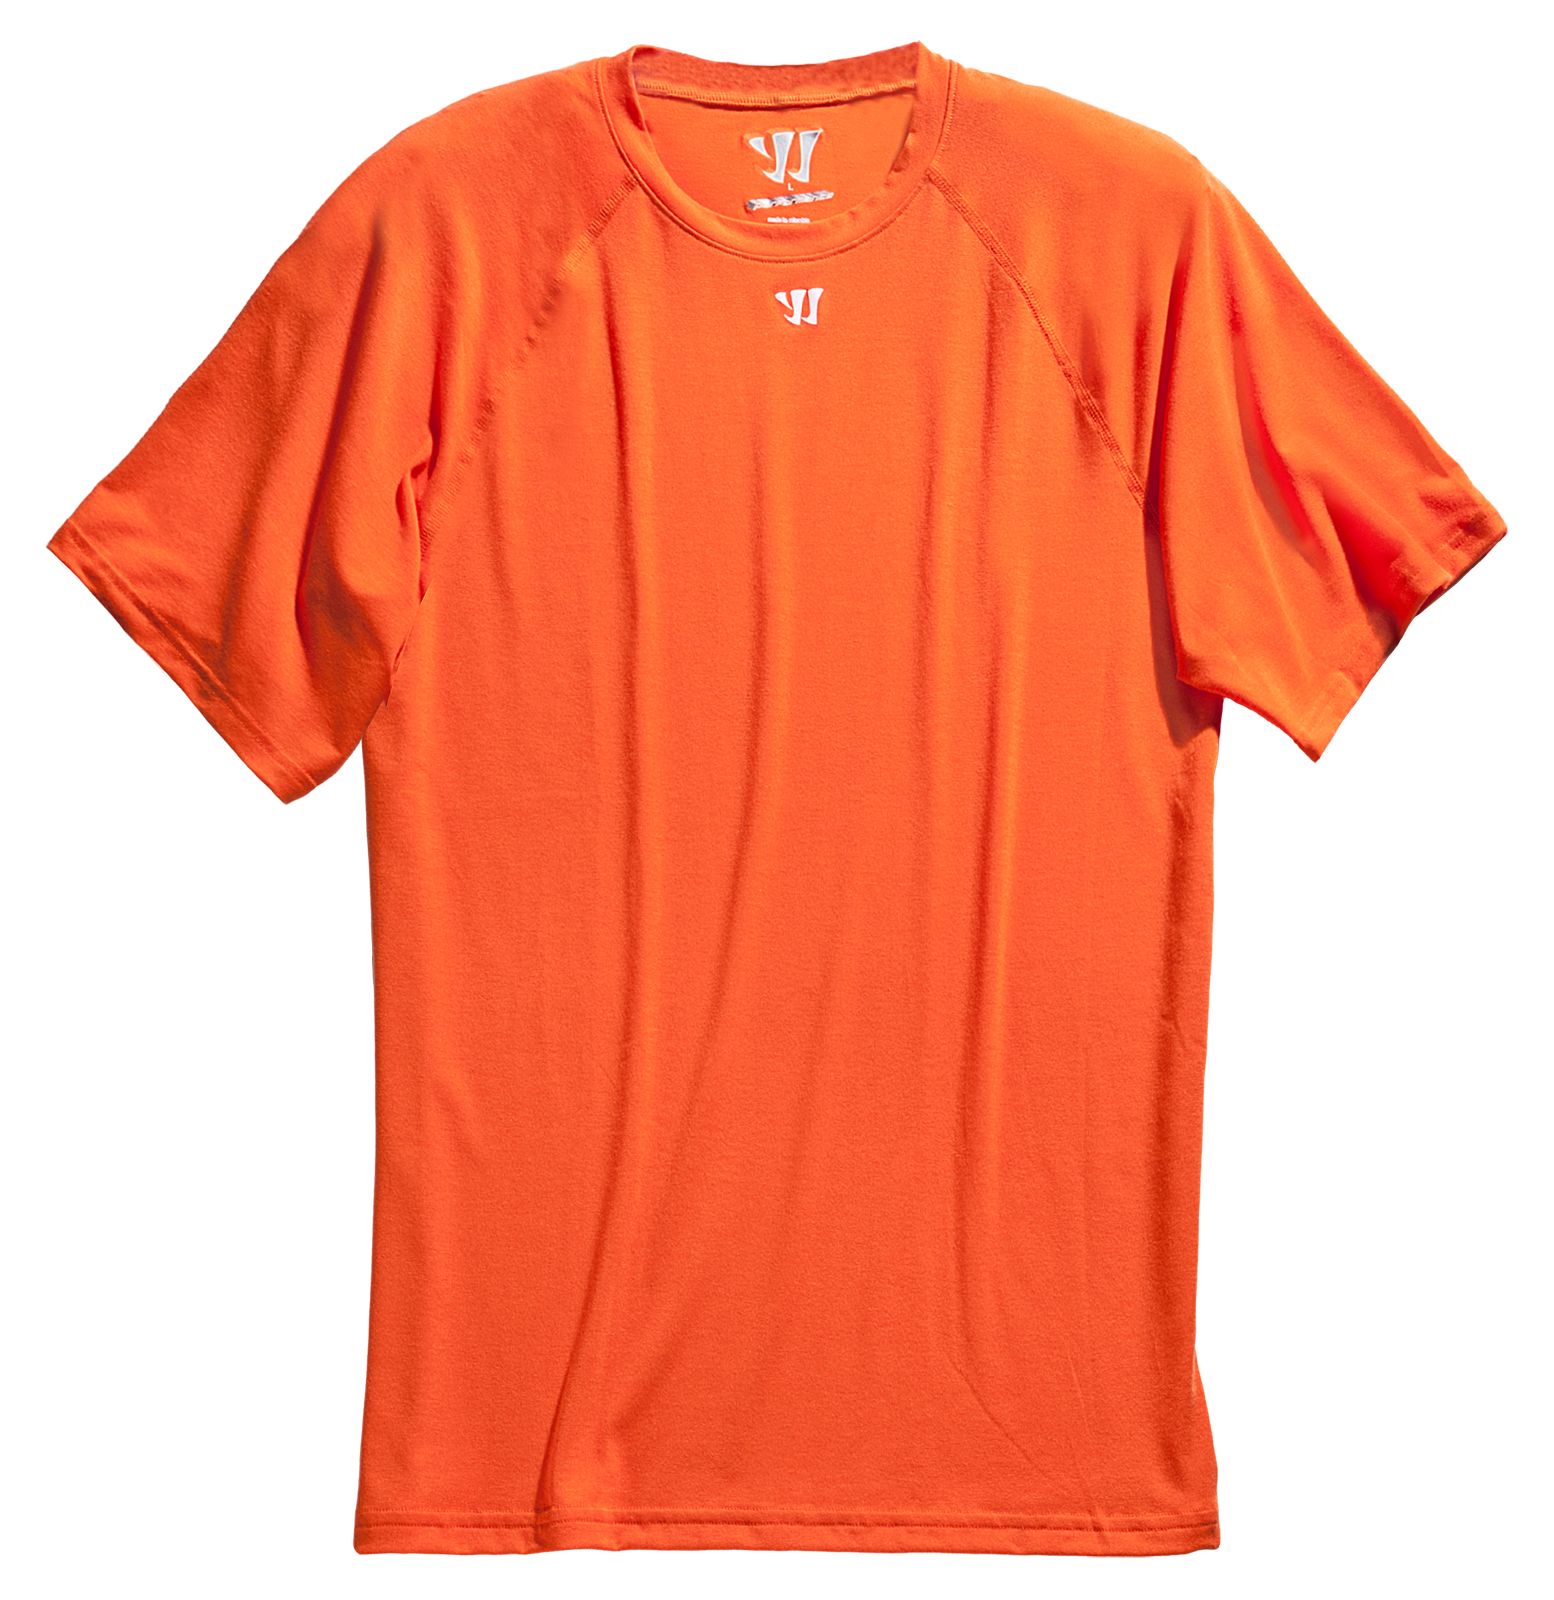 SS Tech Tee,  image number 0